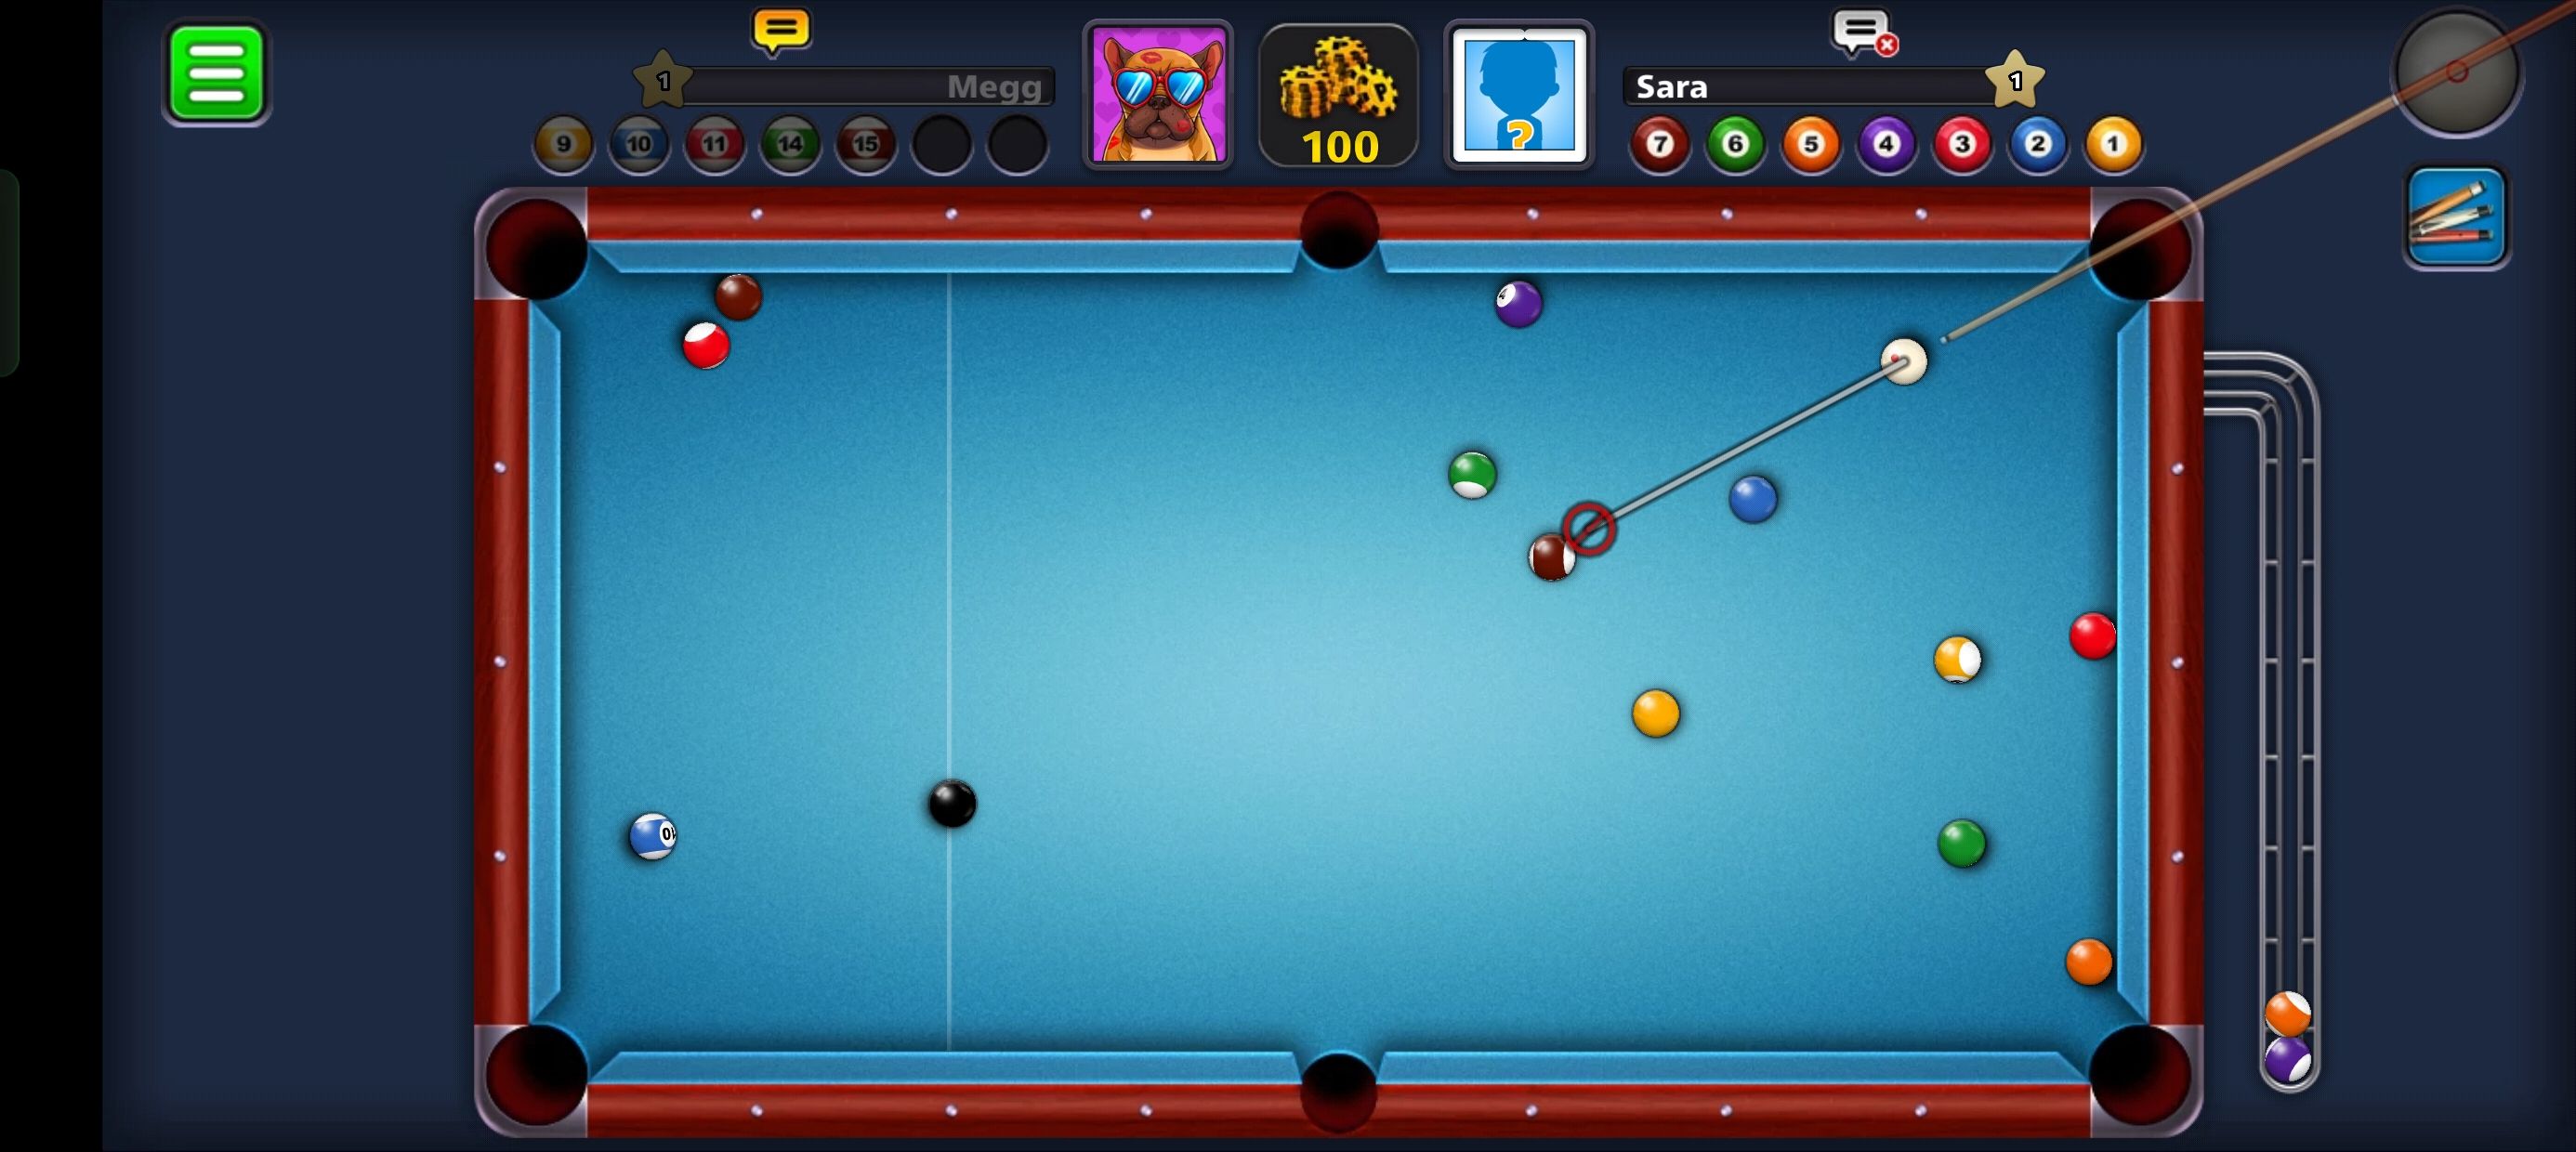 a 1v1 match in 8 ball pool